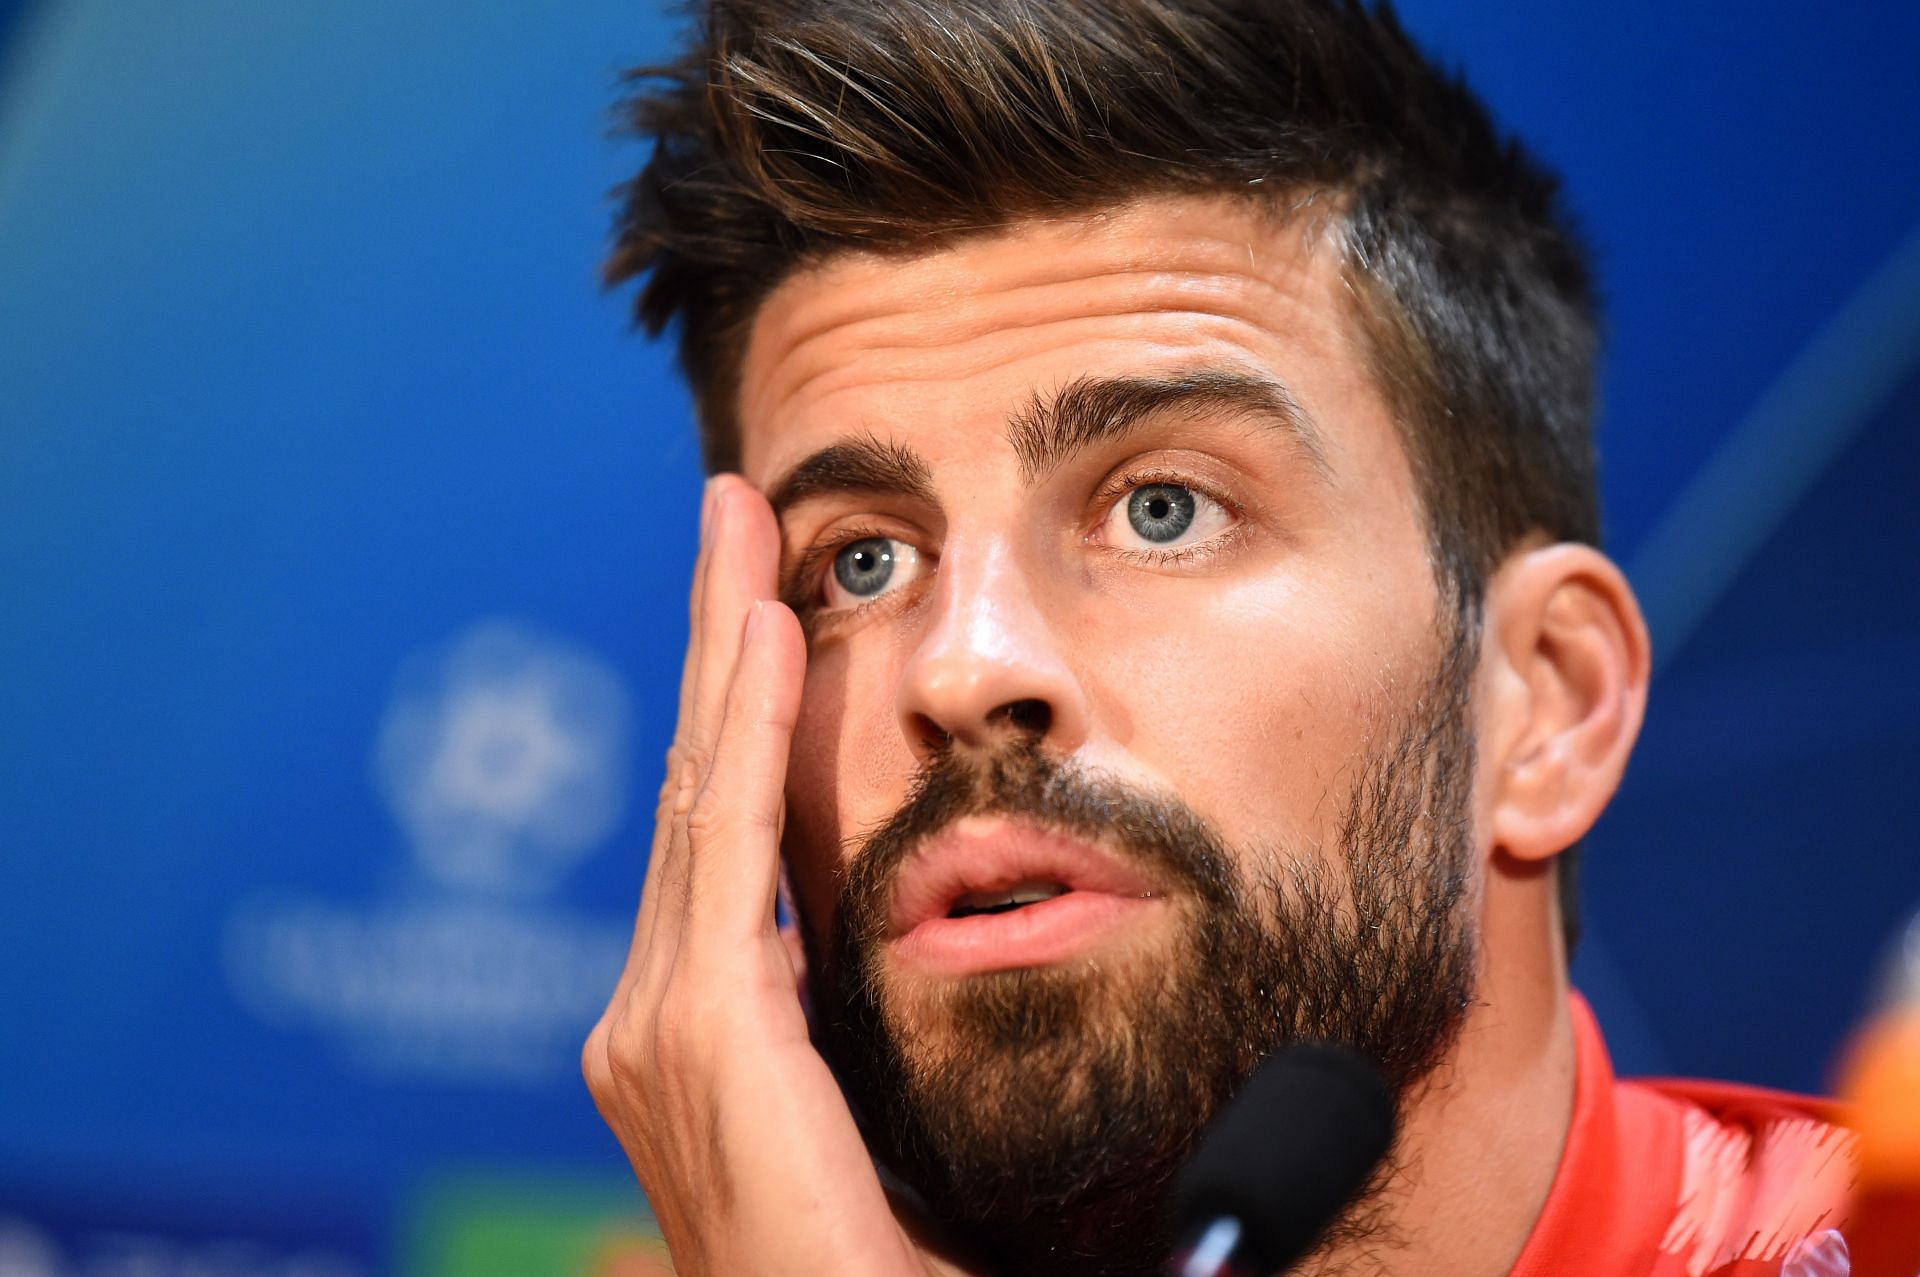 Pique spent four years at Manchester United before returning to Barcelona